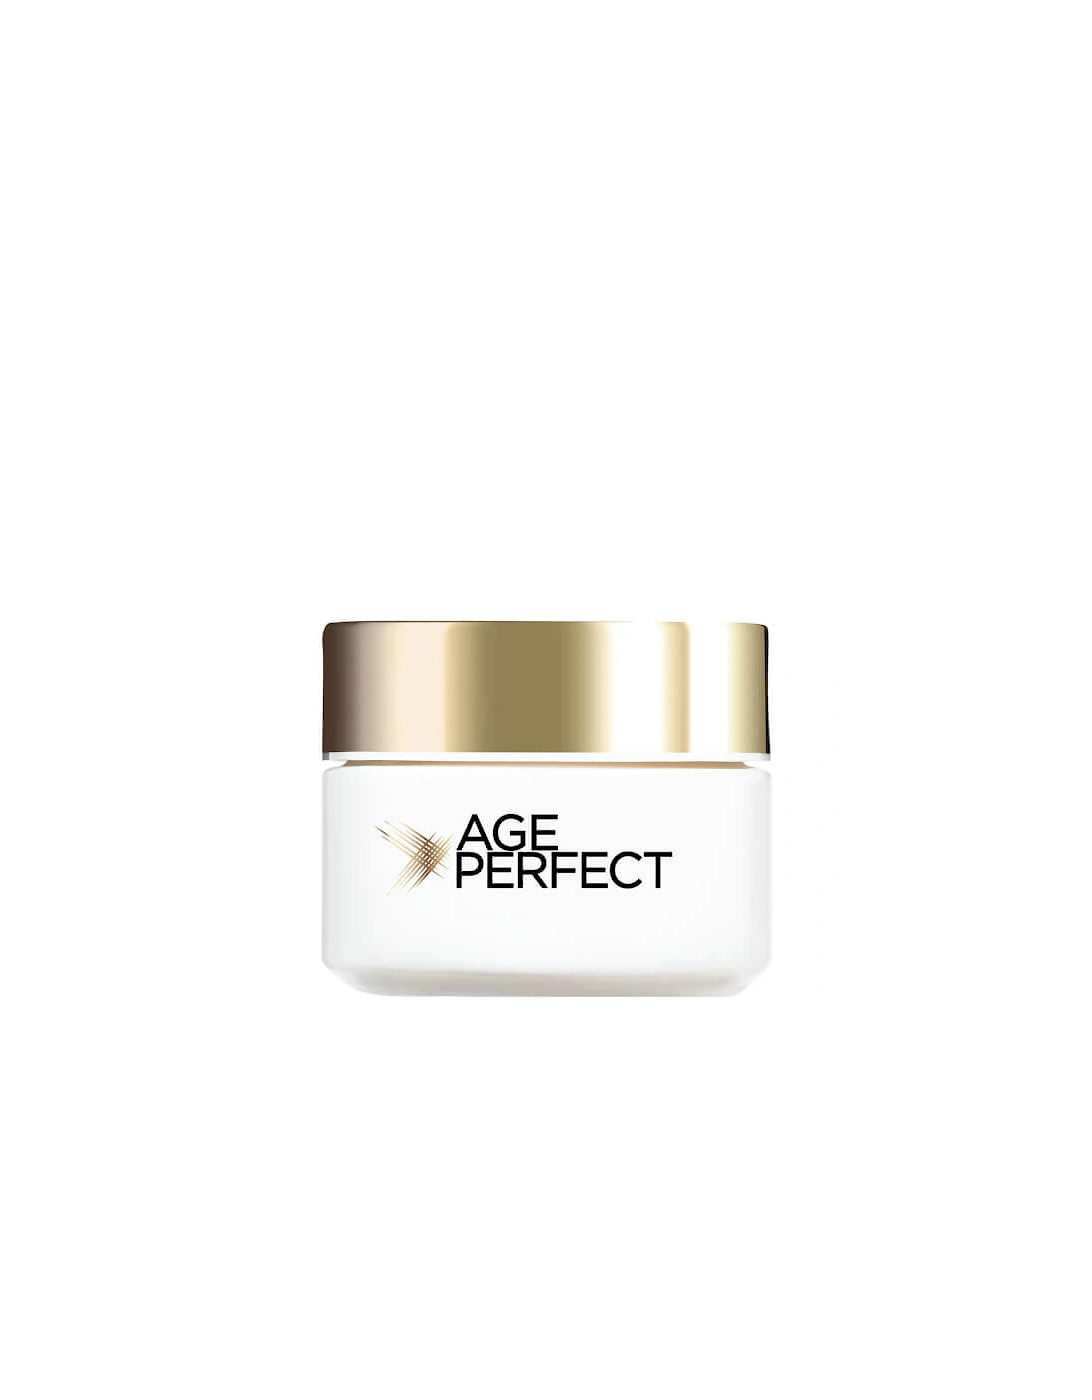 Paris Dermo Expertise Age Perfect Re-Hydrating Day Cream (50ml) - Paris - L'Oreal Paris Dermo Expertise Age Perfect Re-Hydrating Day Cream (50ml) - pp, 2 of 1